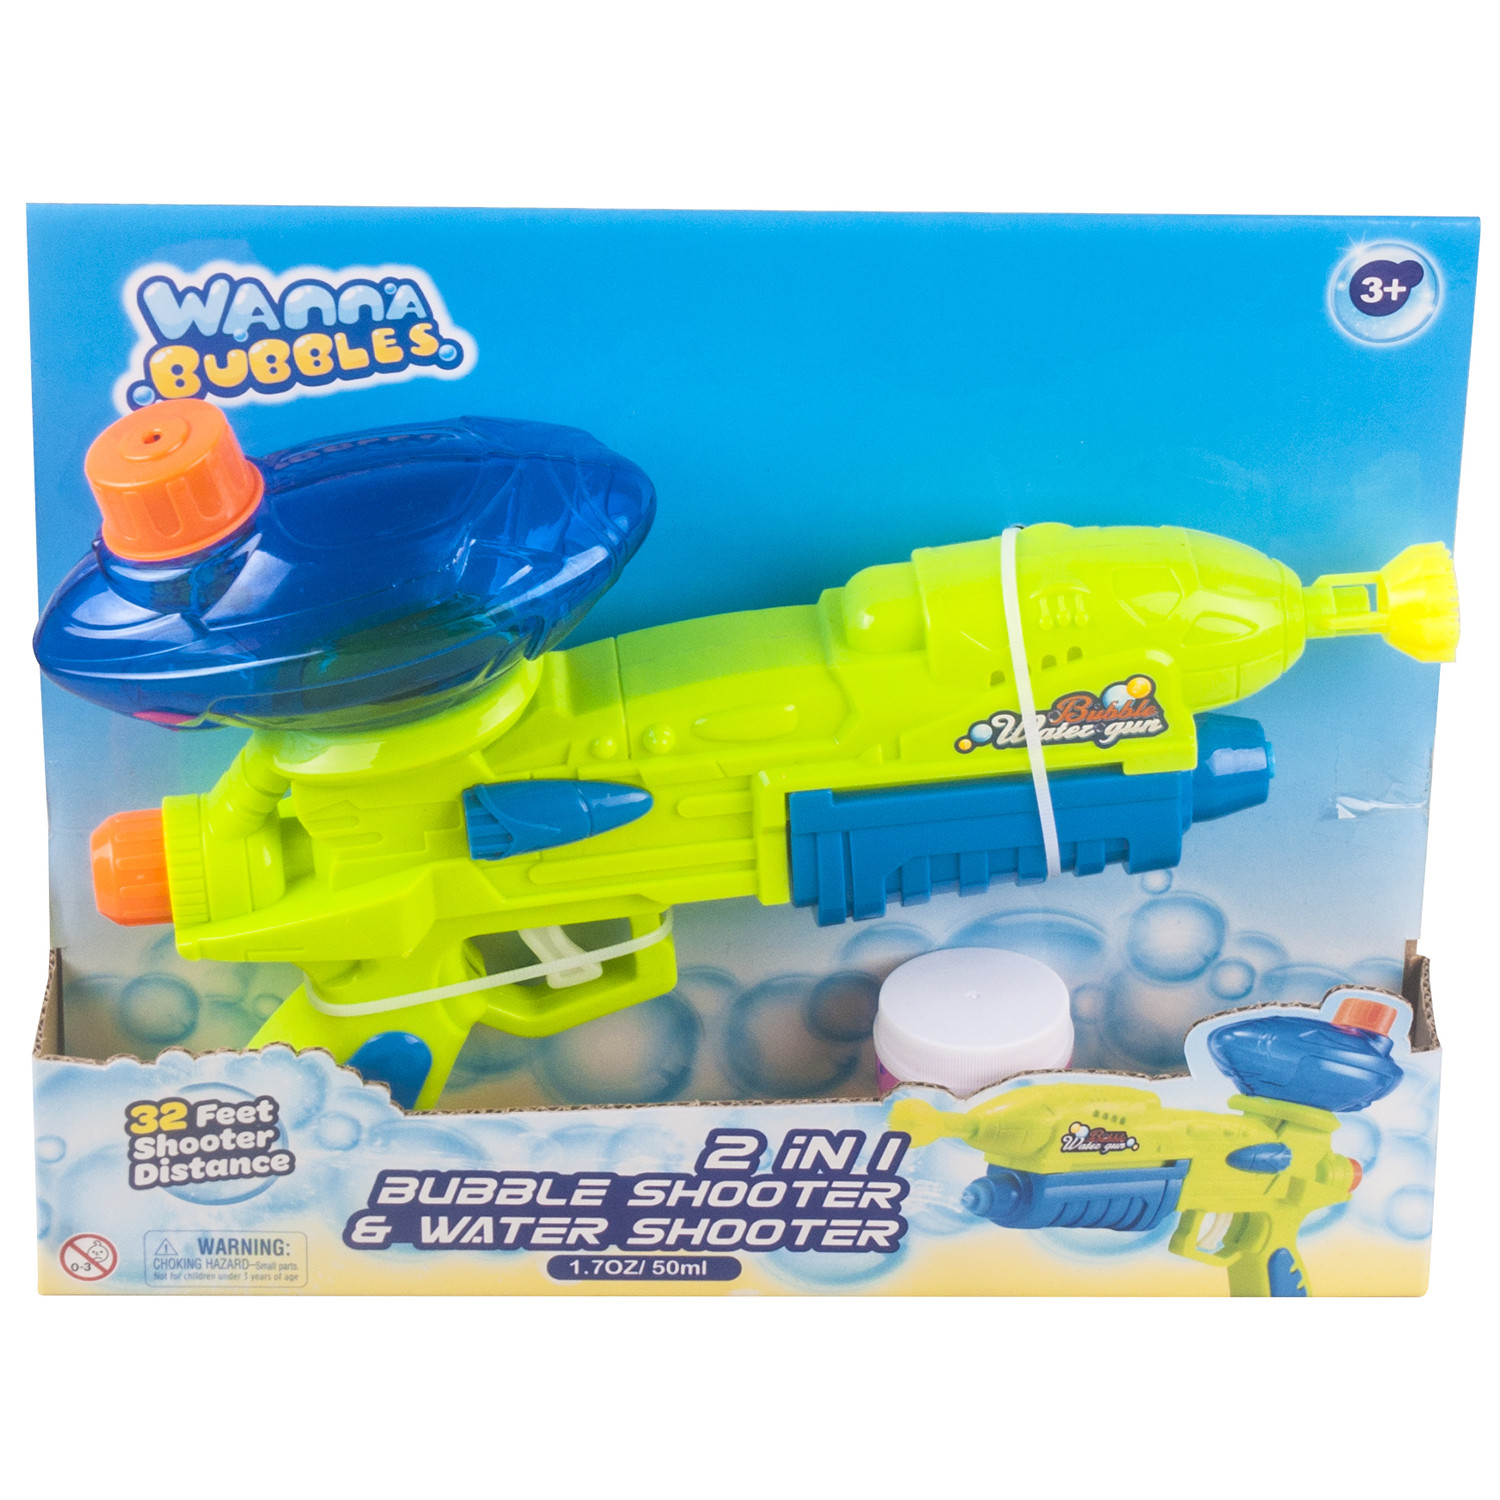 2-in-1 Bubble and Water Shooter Image 2